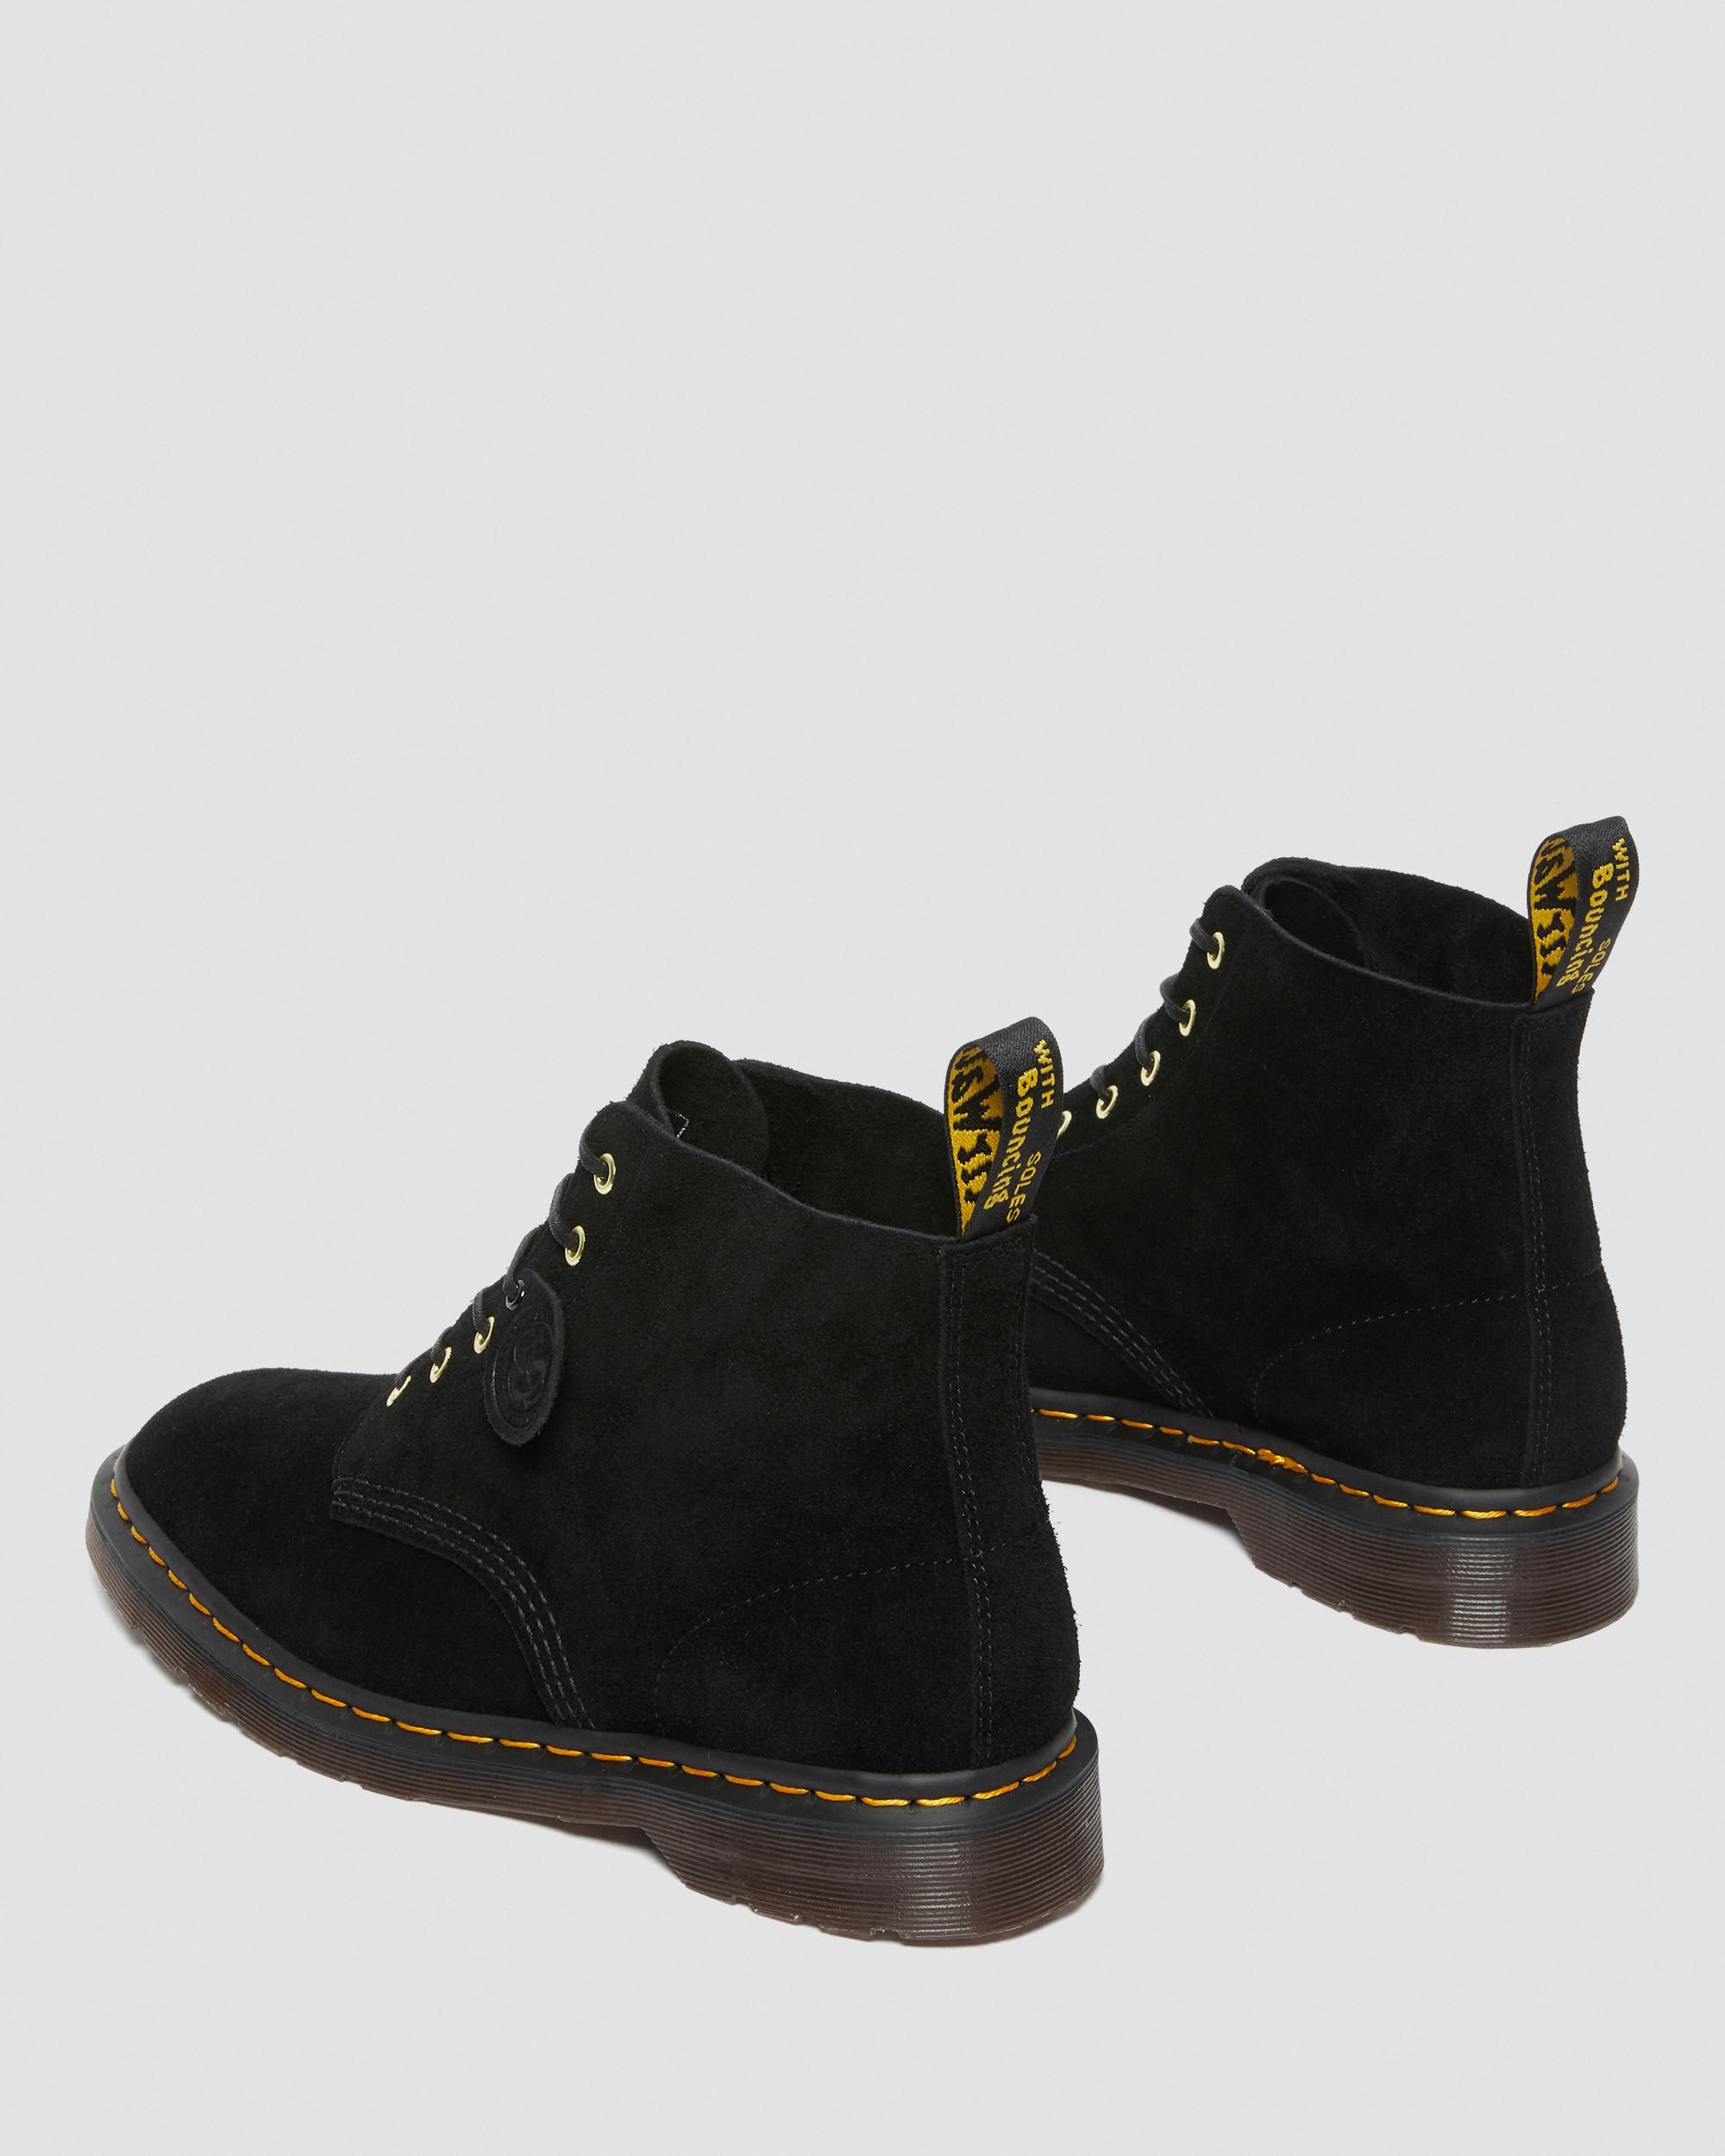 Dr. Martens 101 Suede Ankle Boots in Black | Lyst